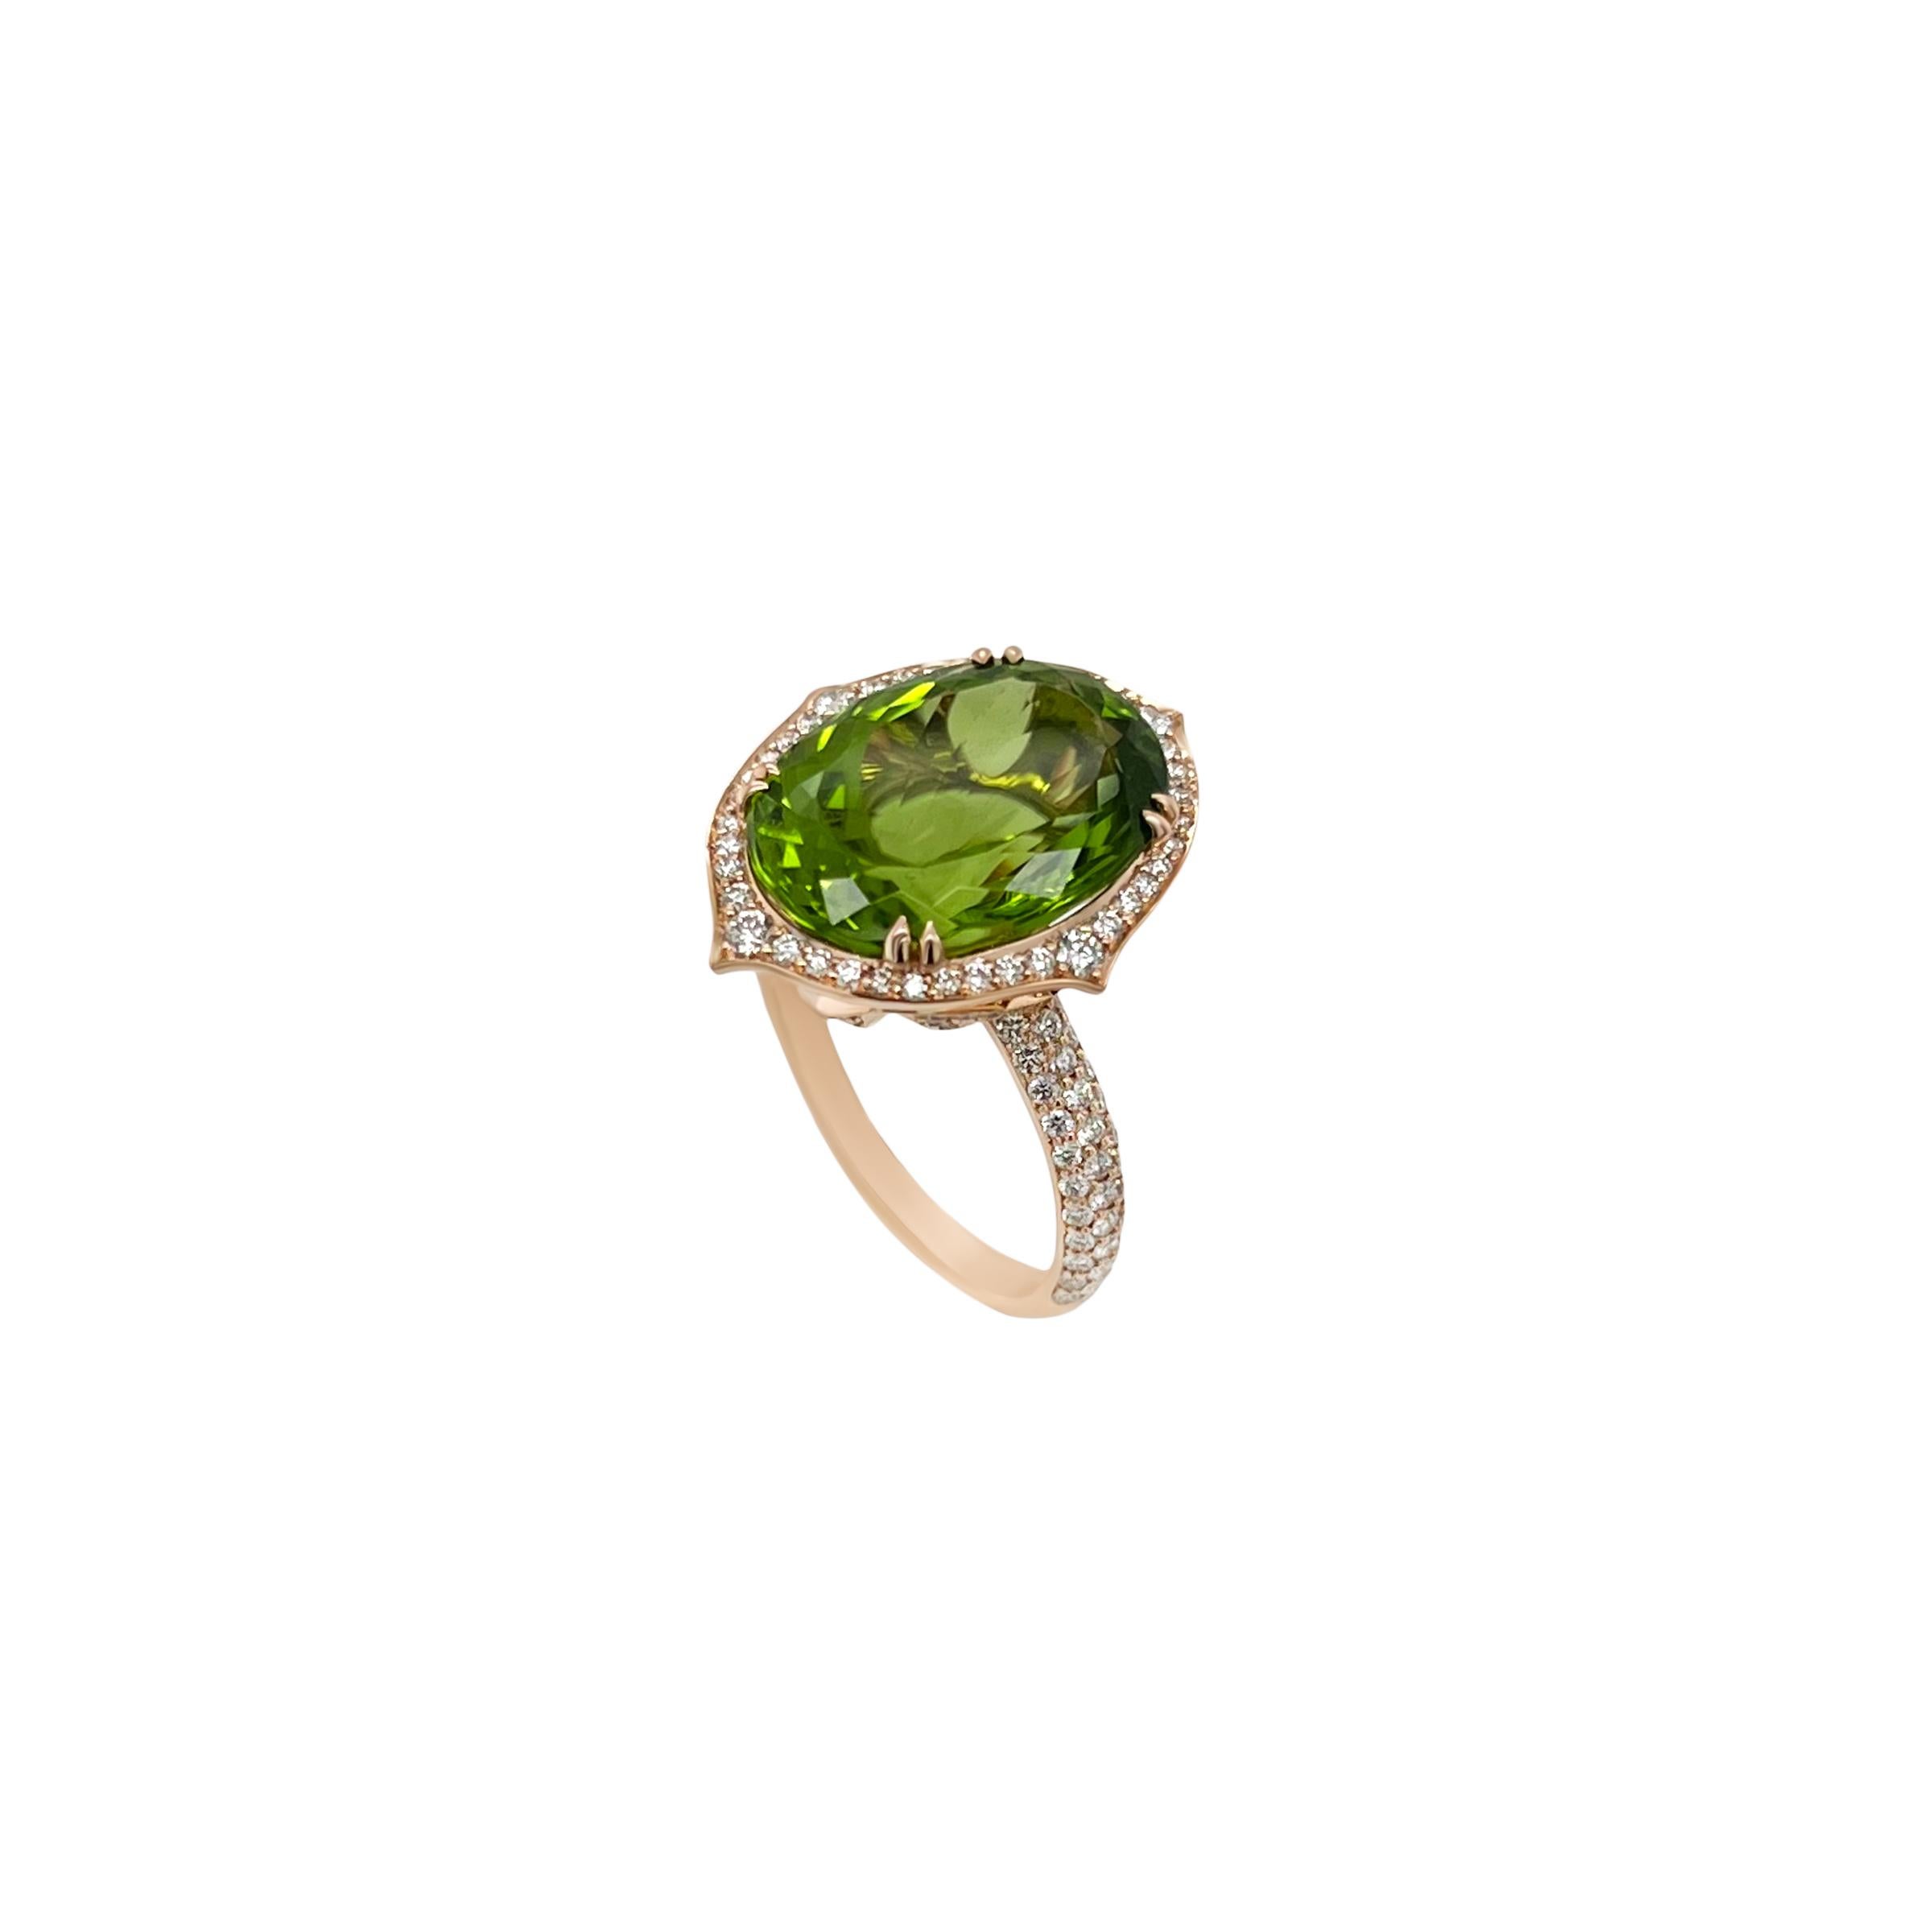 A natural and eye clean 10.03ct Peridot is the star of this ring. The striking green is designed with a halo of diamonds featuring pointed edges. The under mounting of this ring was also designed intricately in a floral motif completed by a rounded